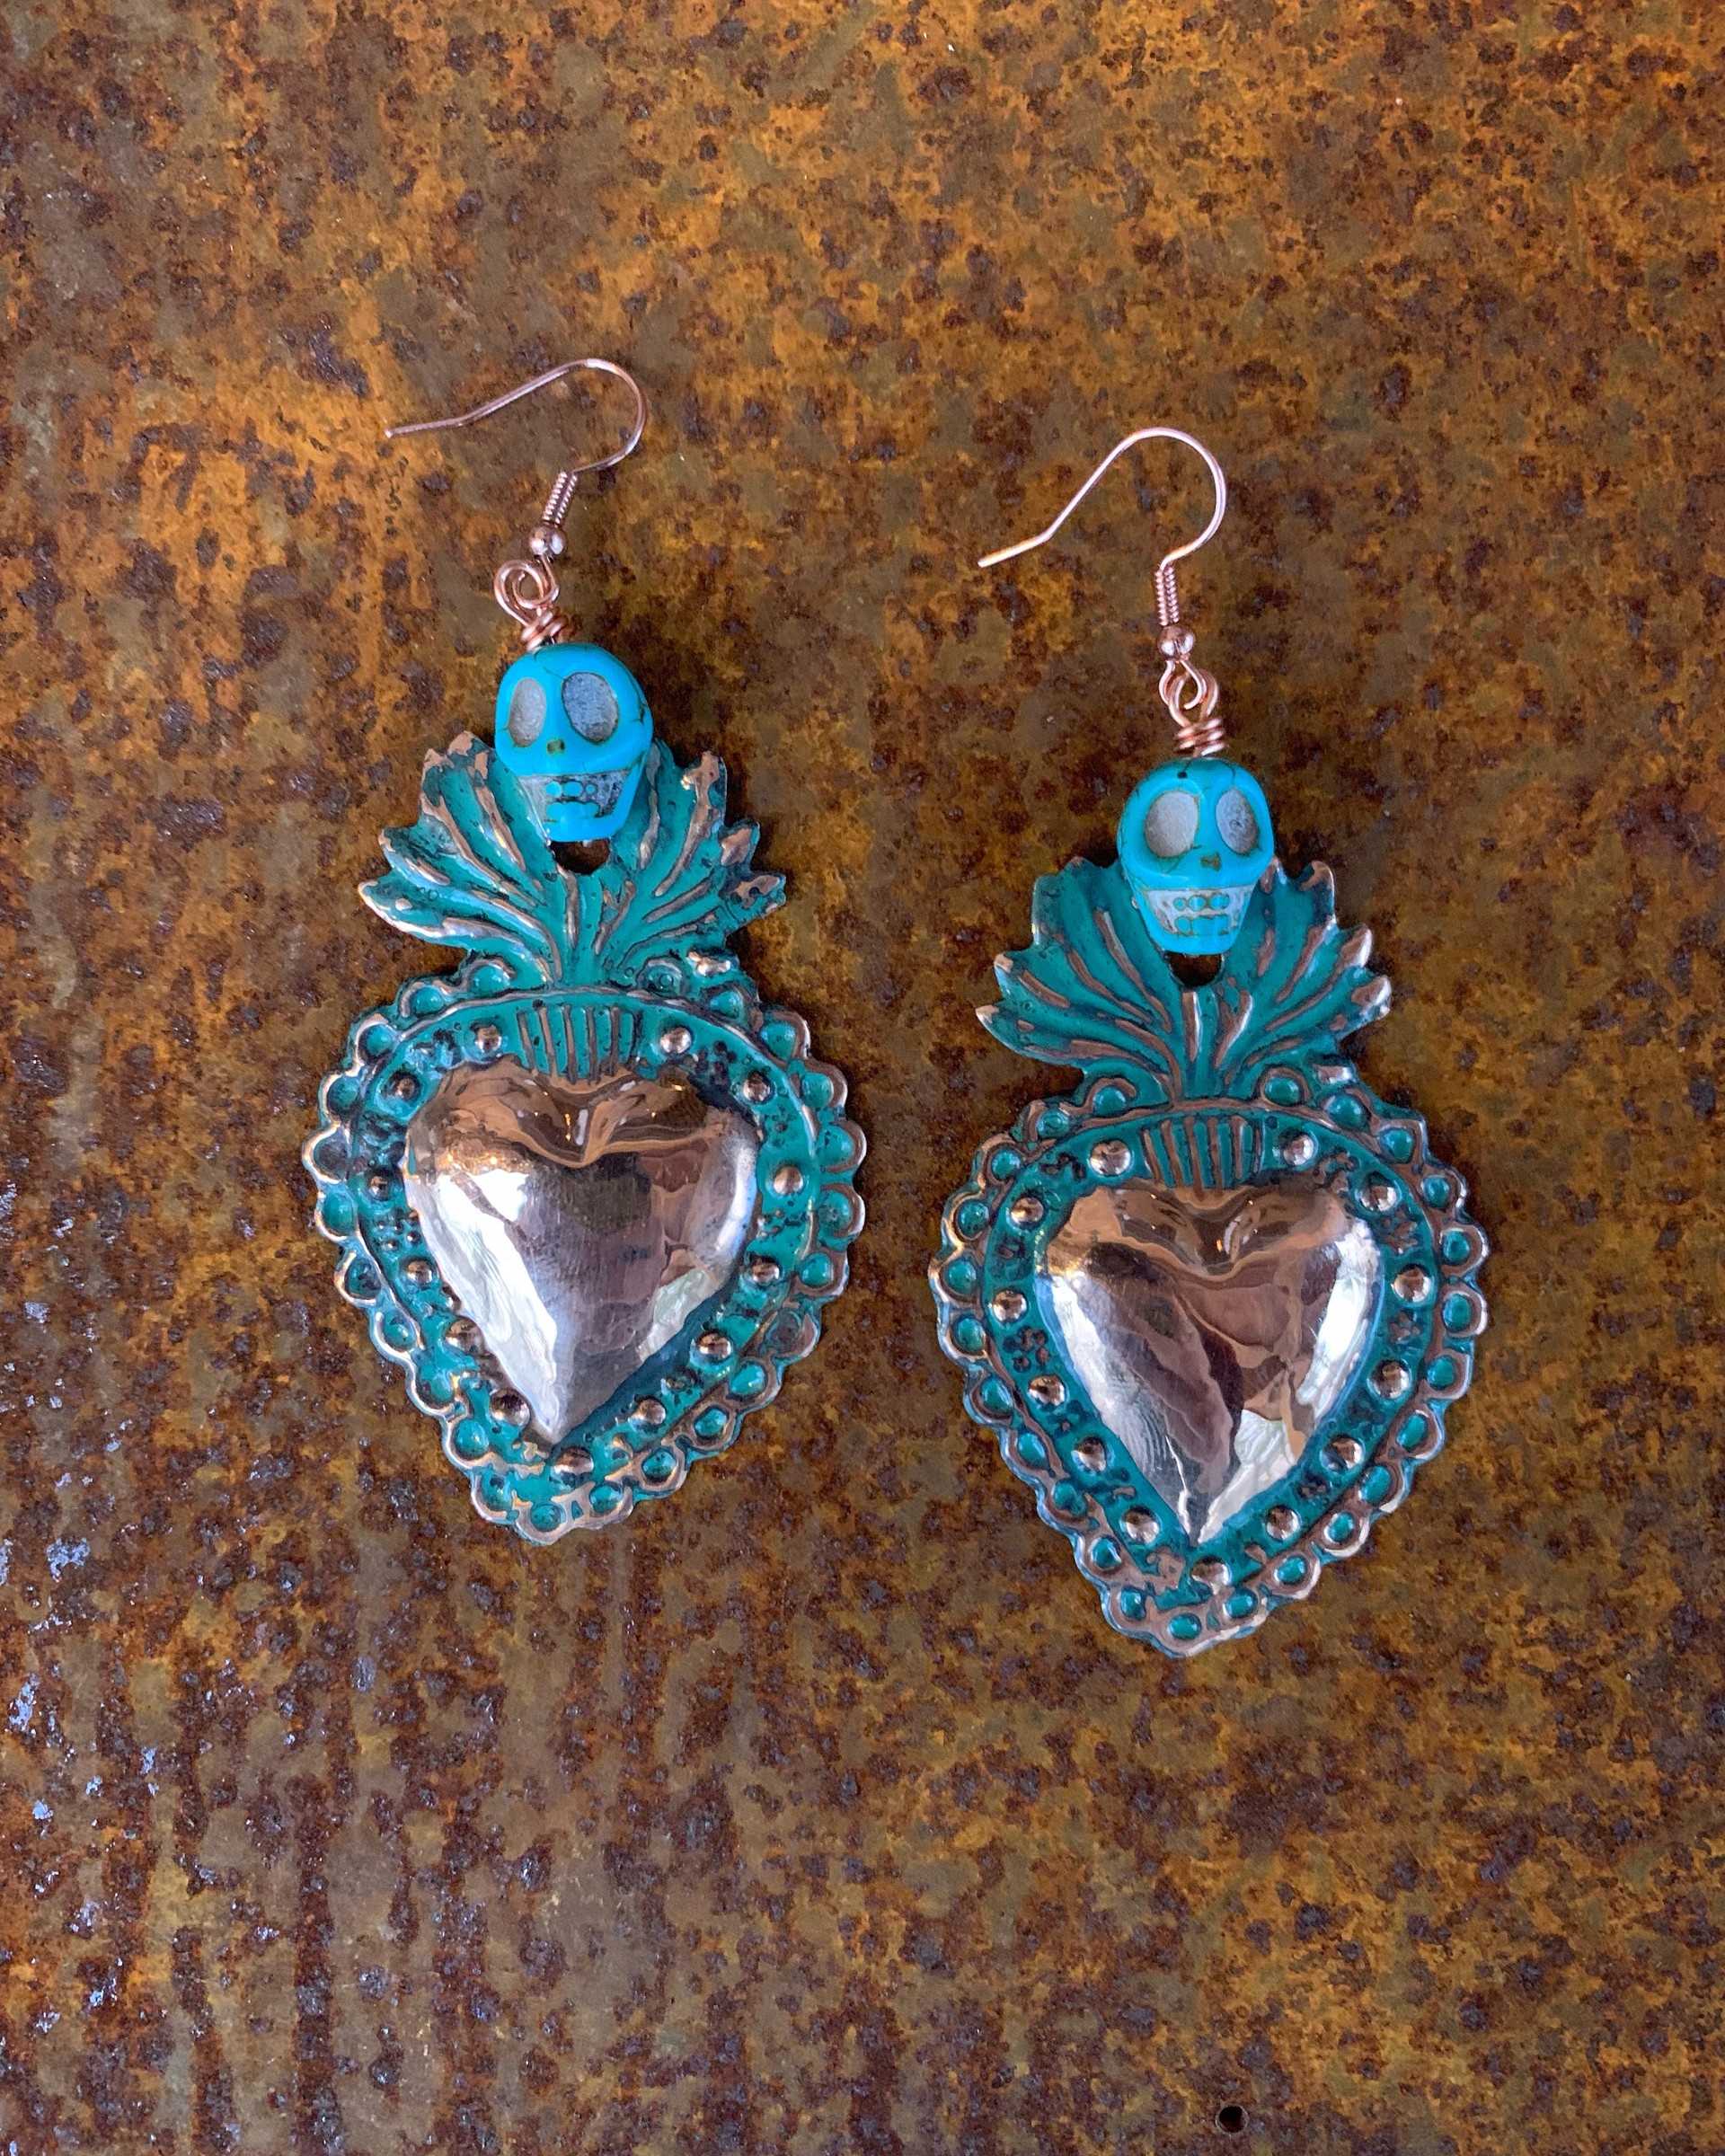 K531 Copper Sacred Heart Earrings with Turquoise and Amethyst by Kelly Ormsby